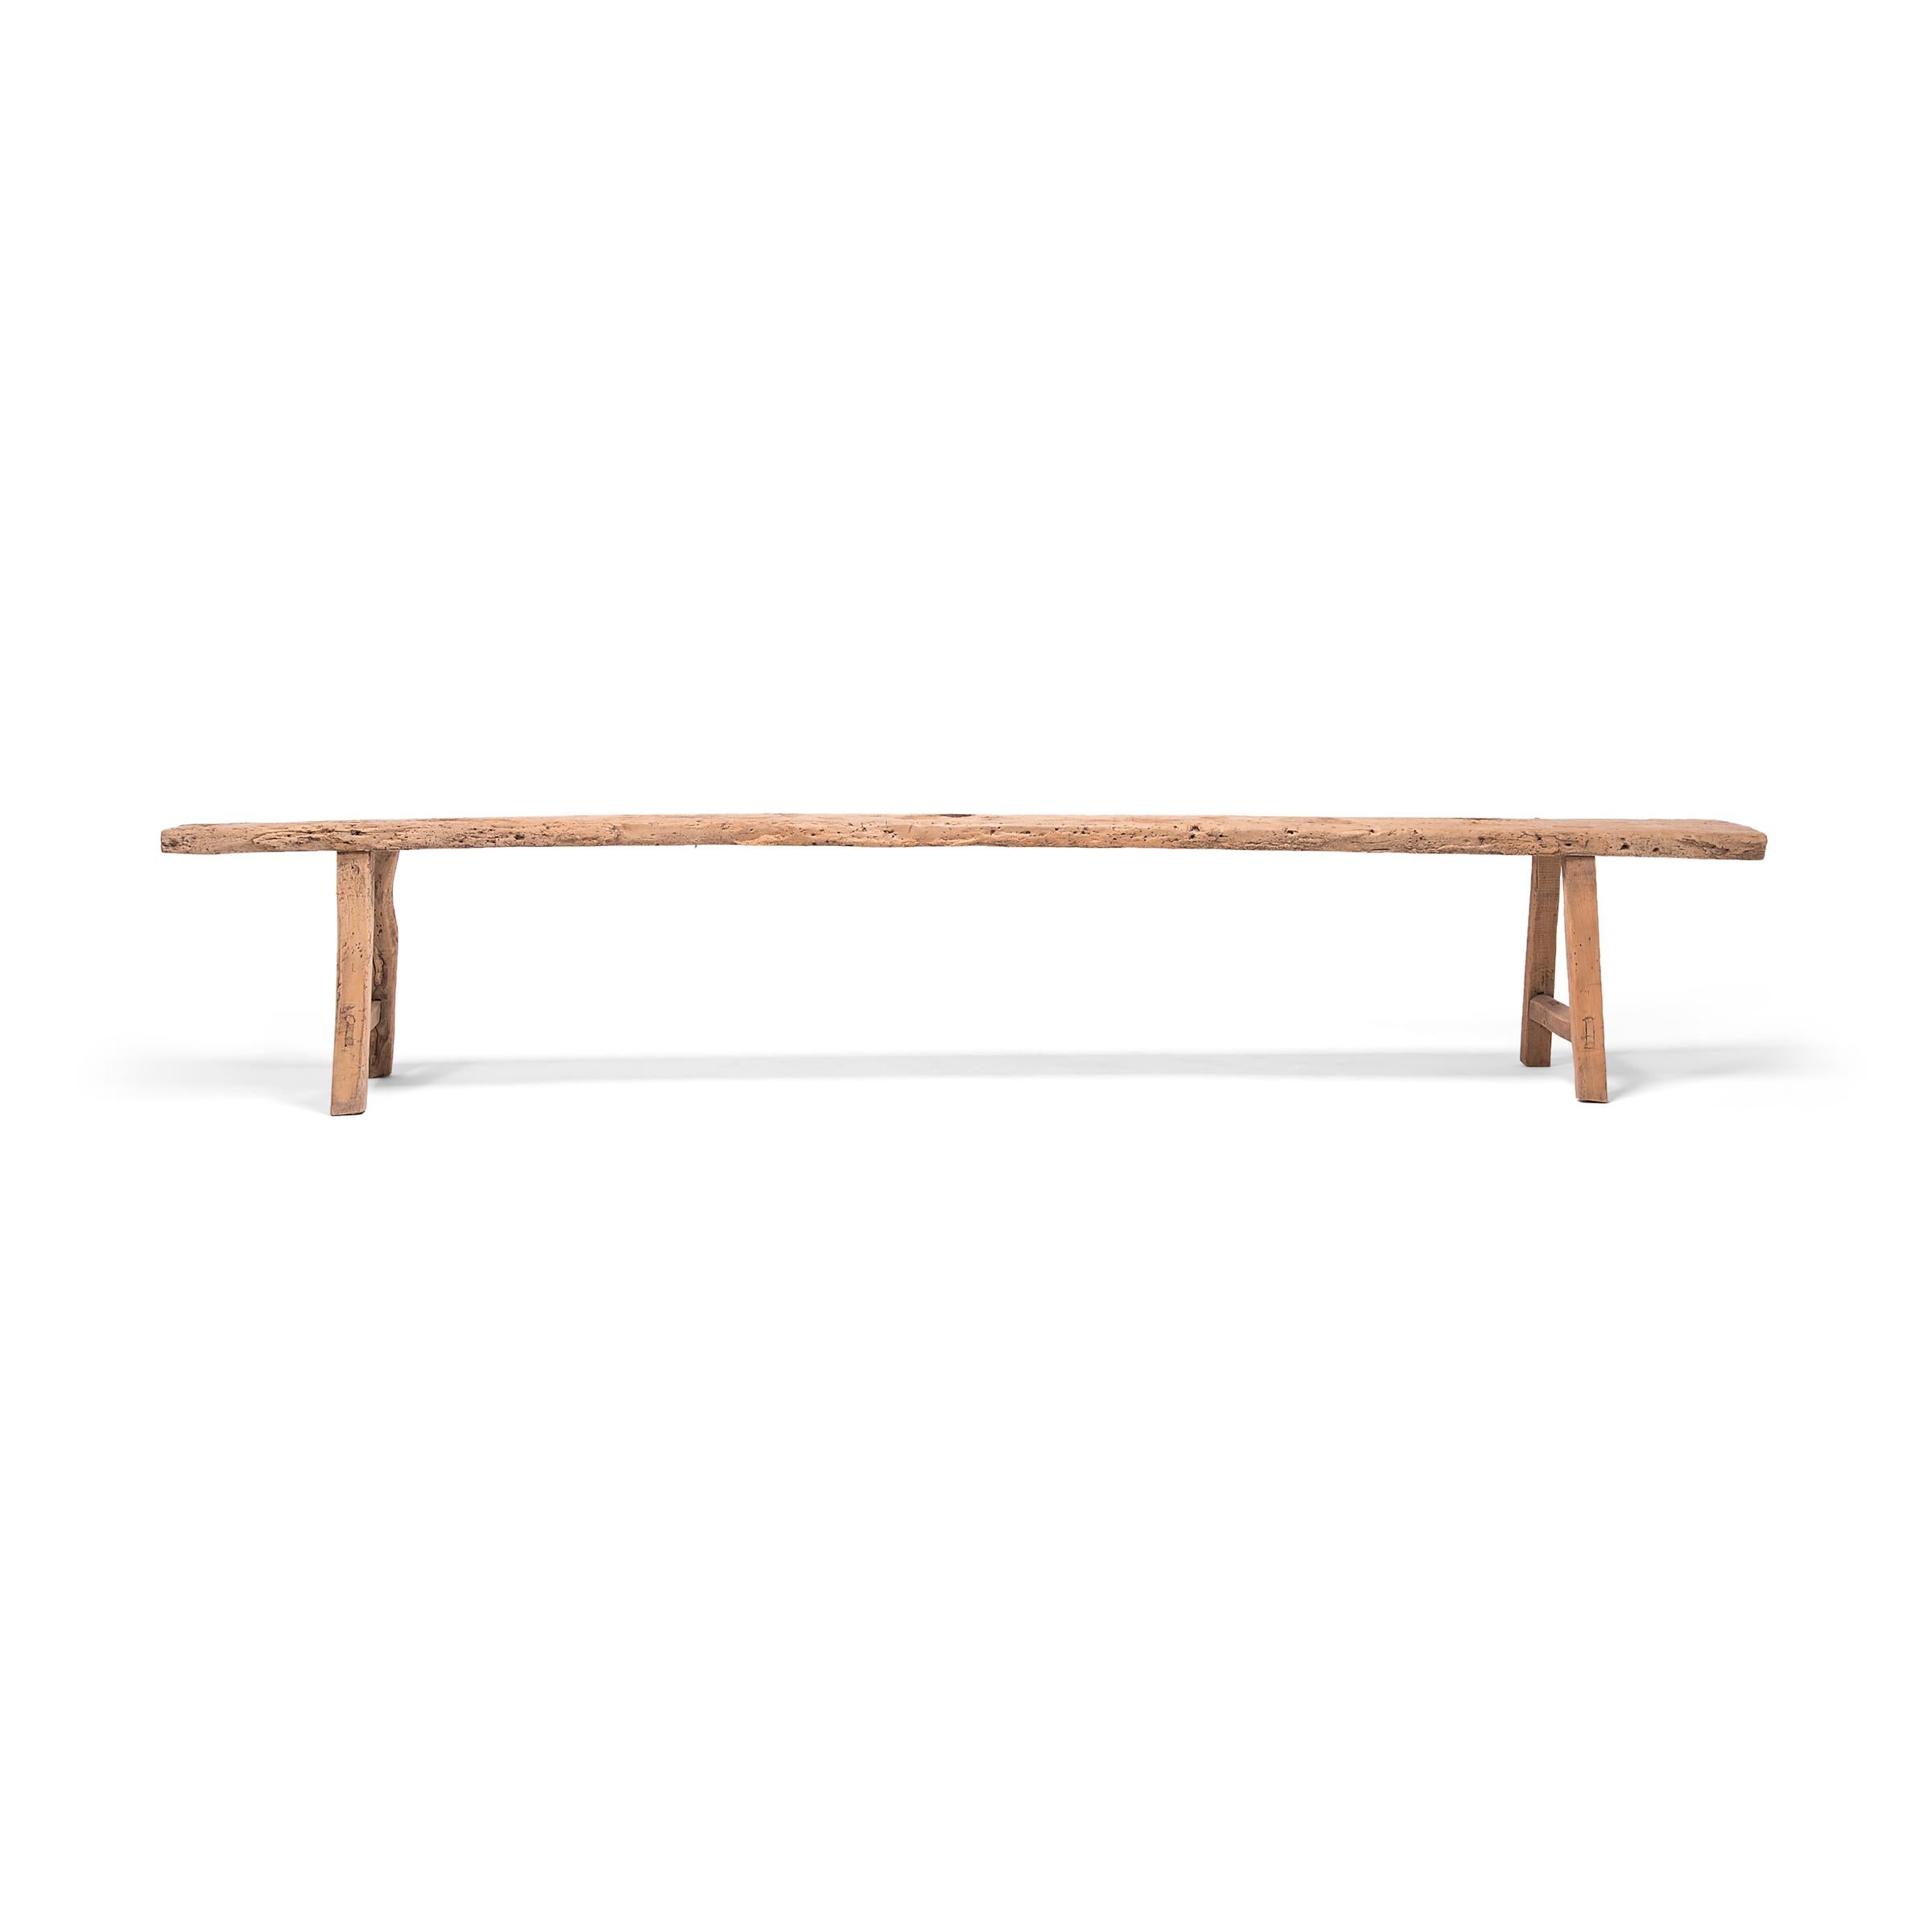 This long, narrow bench exemplifies rustic style with its simple design and wonderfully aged surface. Crafted by anartisan in China's Shanxi province, the bench would have been used as versatile seating along a hútòng, the meandering walkway linking